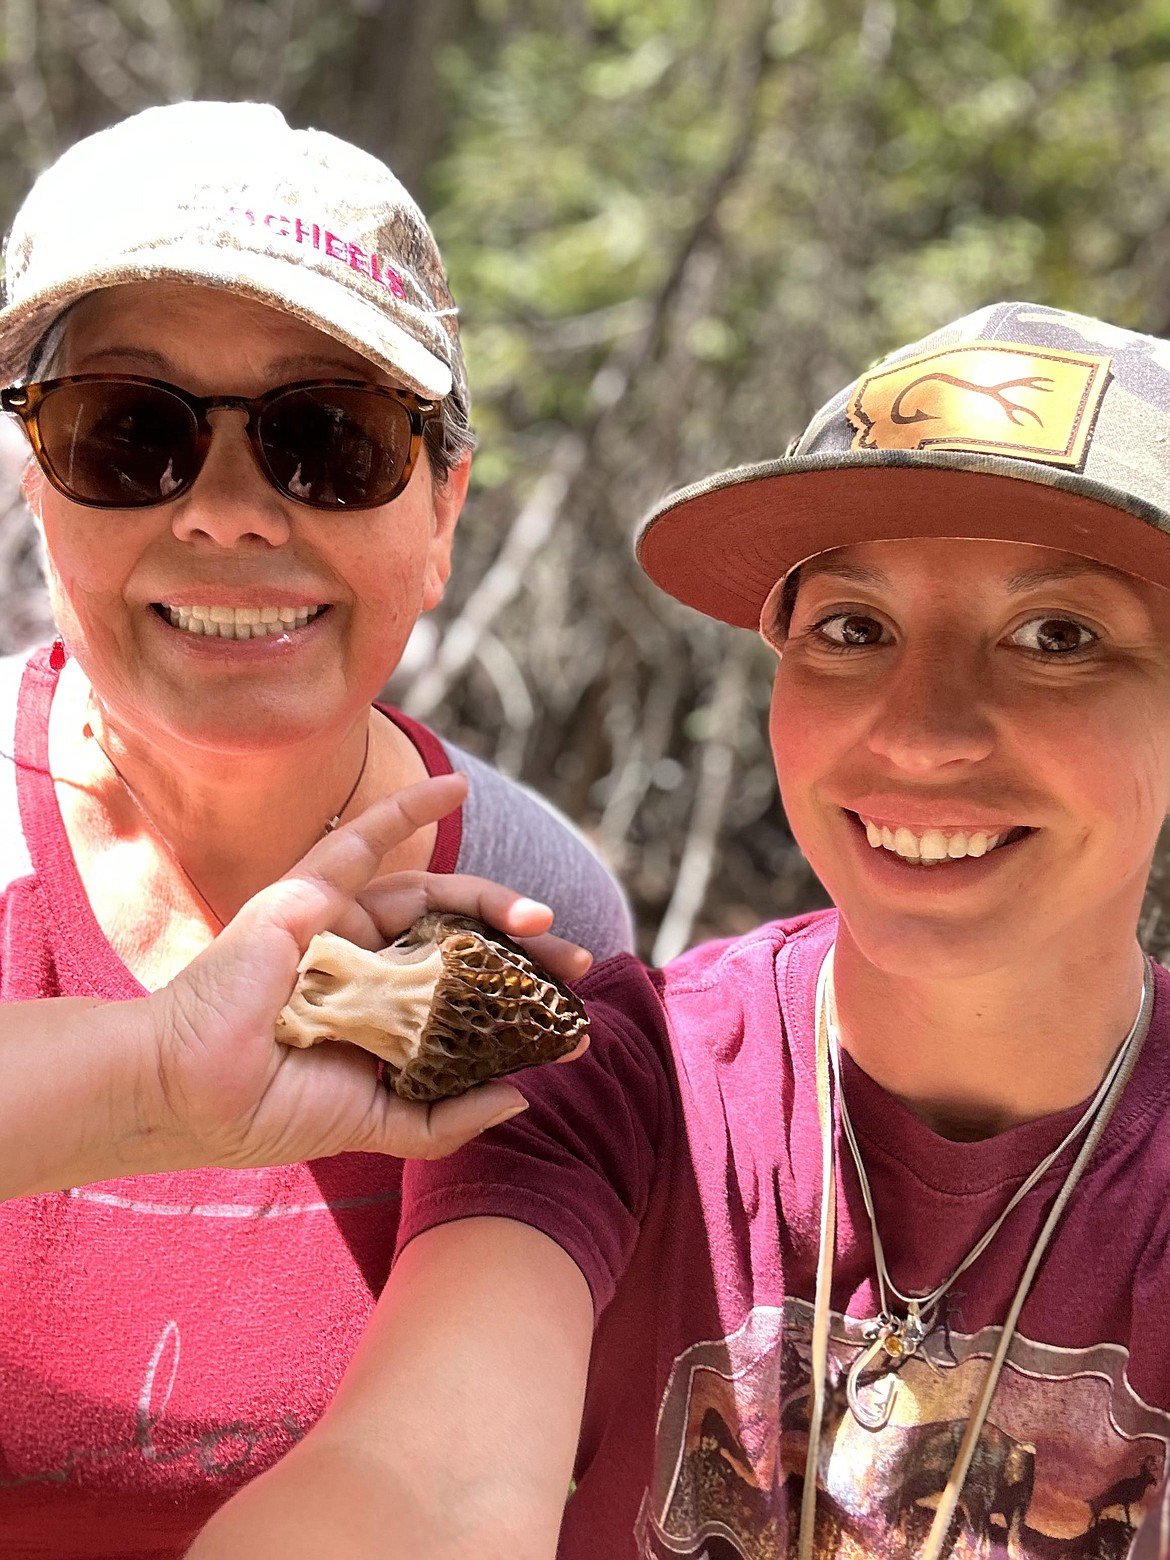 Over Mother's Day weekend, Sandra Connor of St. Regis spent some special time out in the woods foraging for morels with her mom. (Photo courtesy/Sandra Connor)